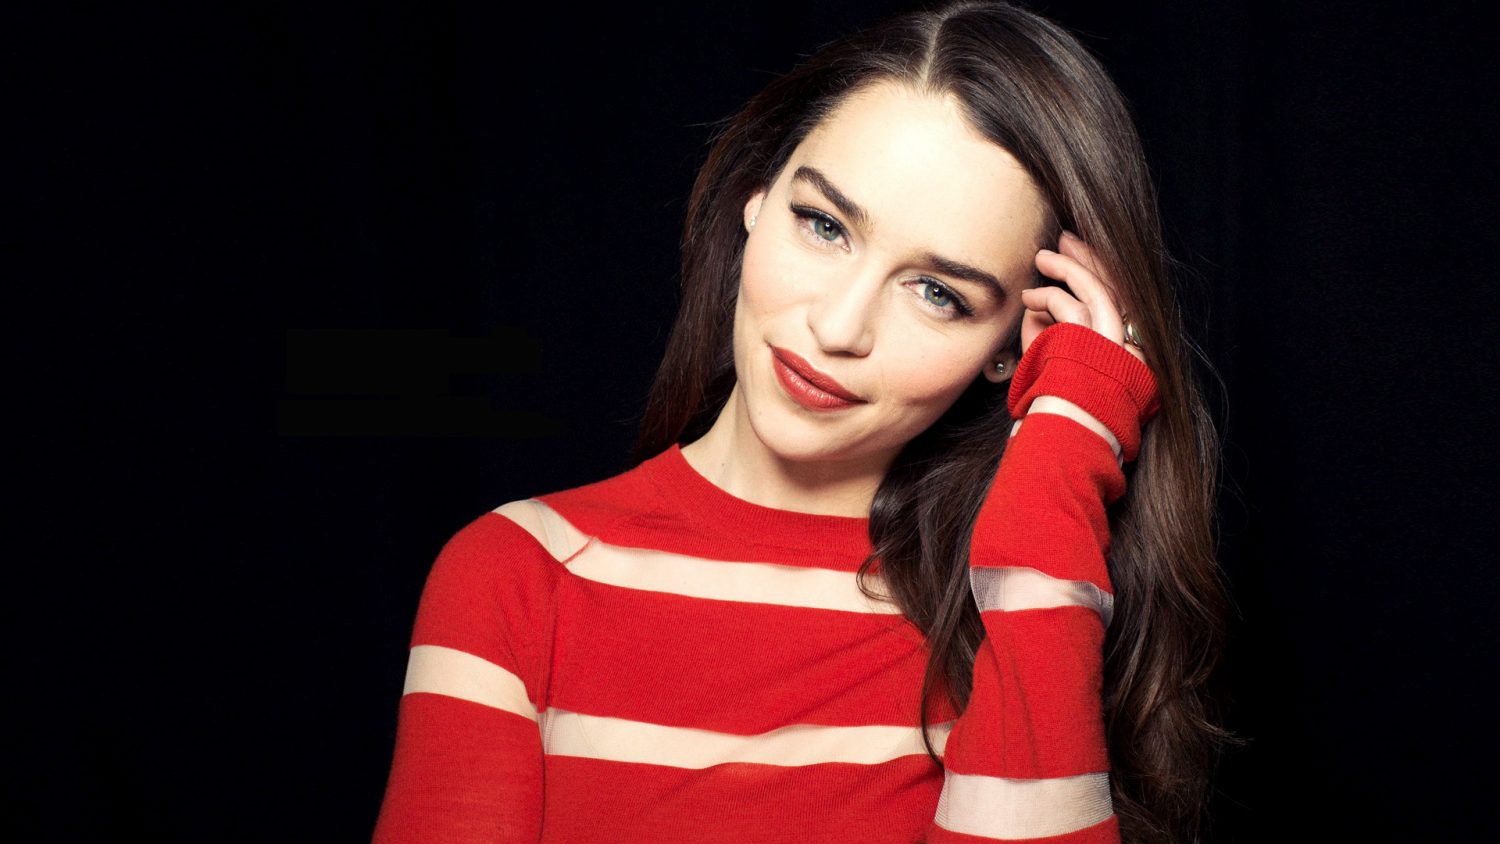 Emilia clarke to be the female lead in upcoming han solo feature